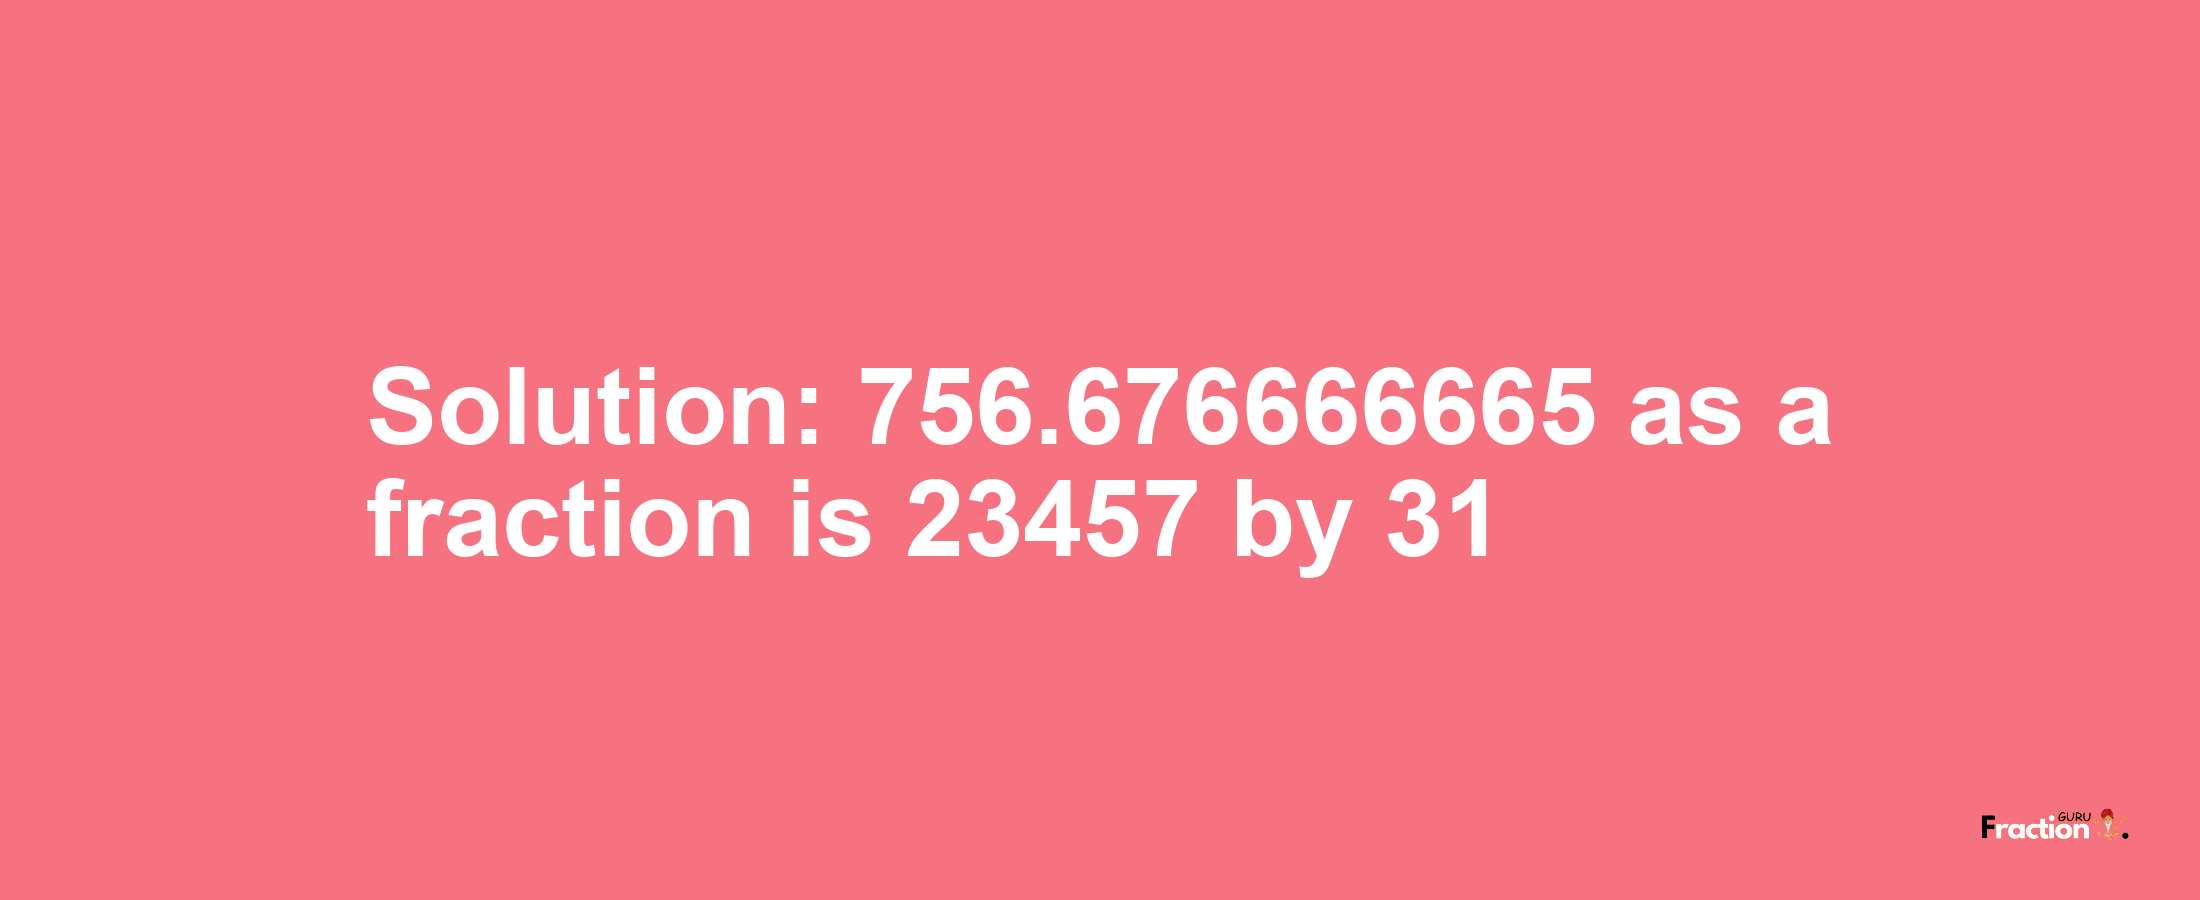 Solution:756.676666665 as a fraction is 23457/31